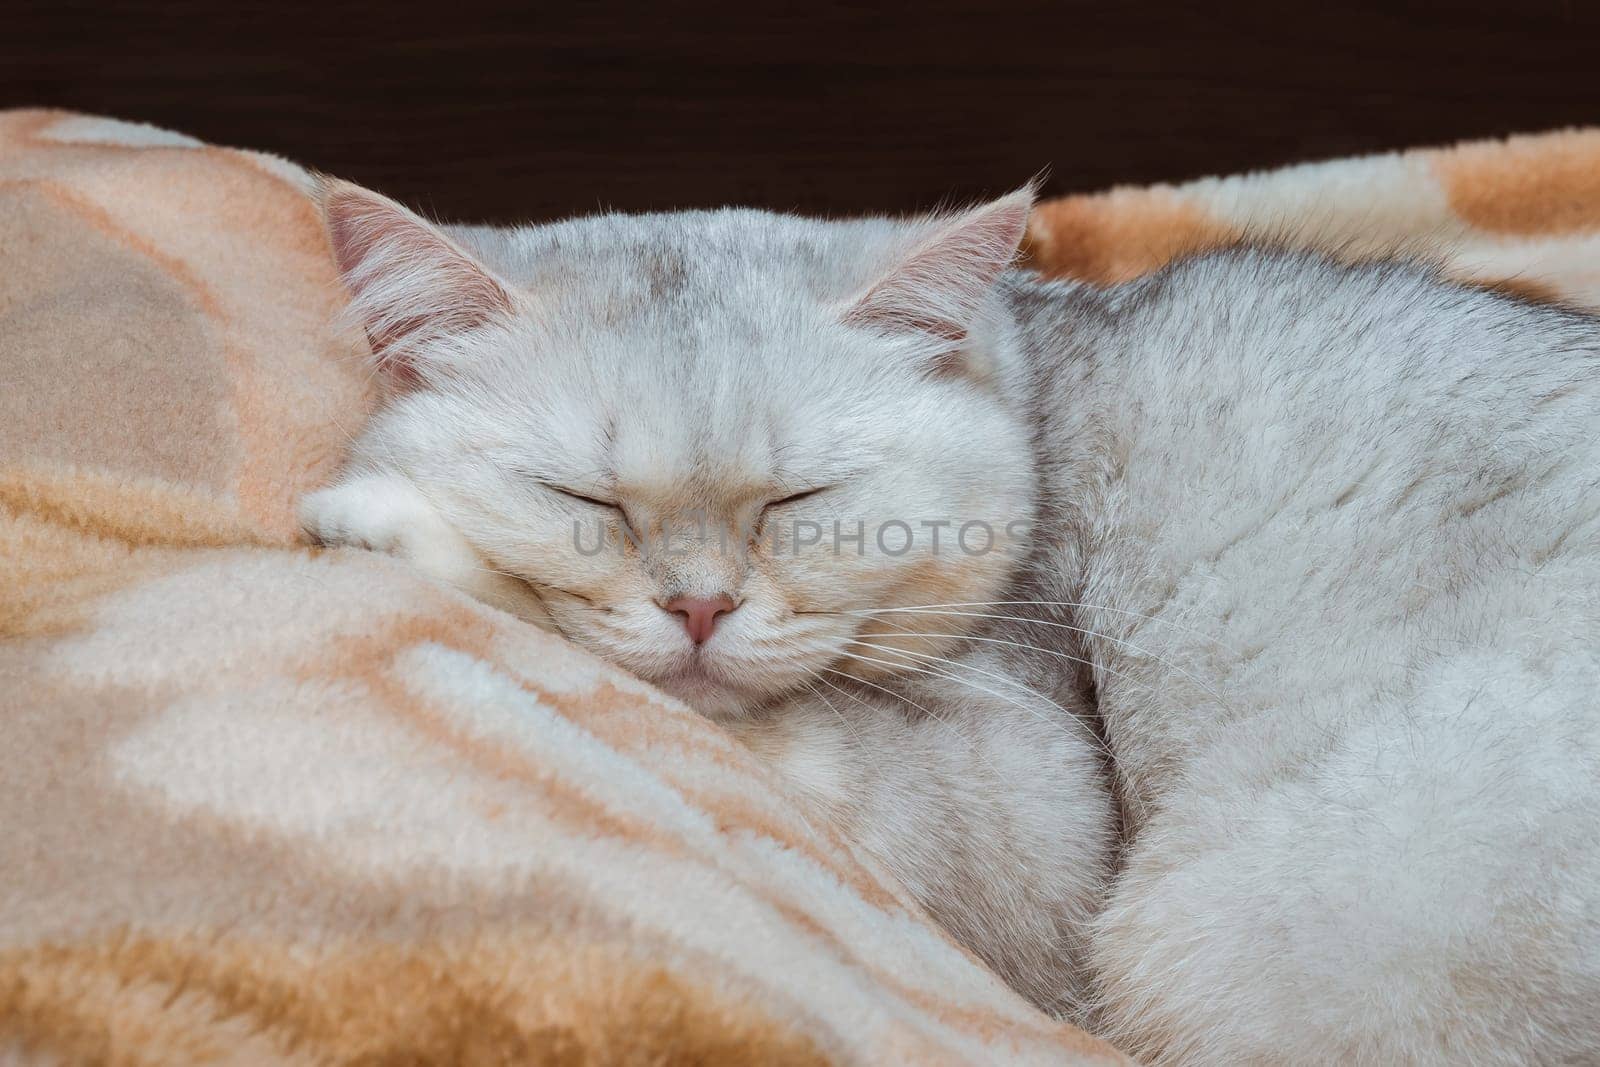 A silvery British breed cat is sleeping in close-up on a bed with its head on a pillow. Pets at home